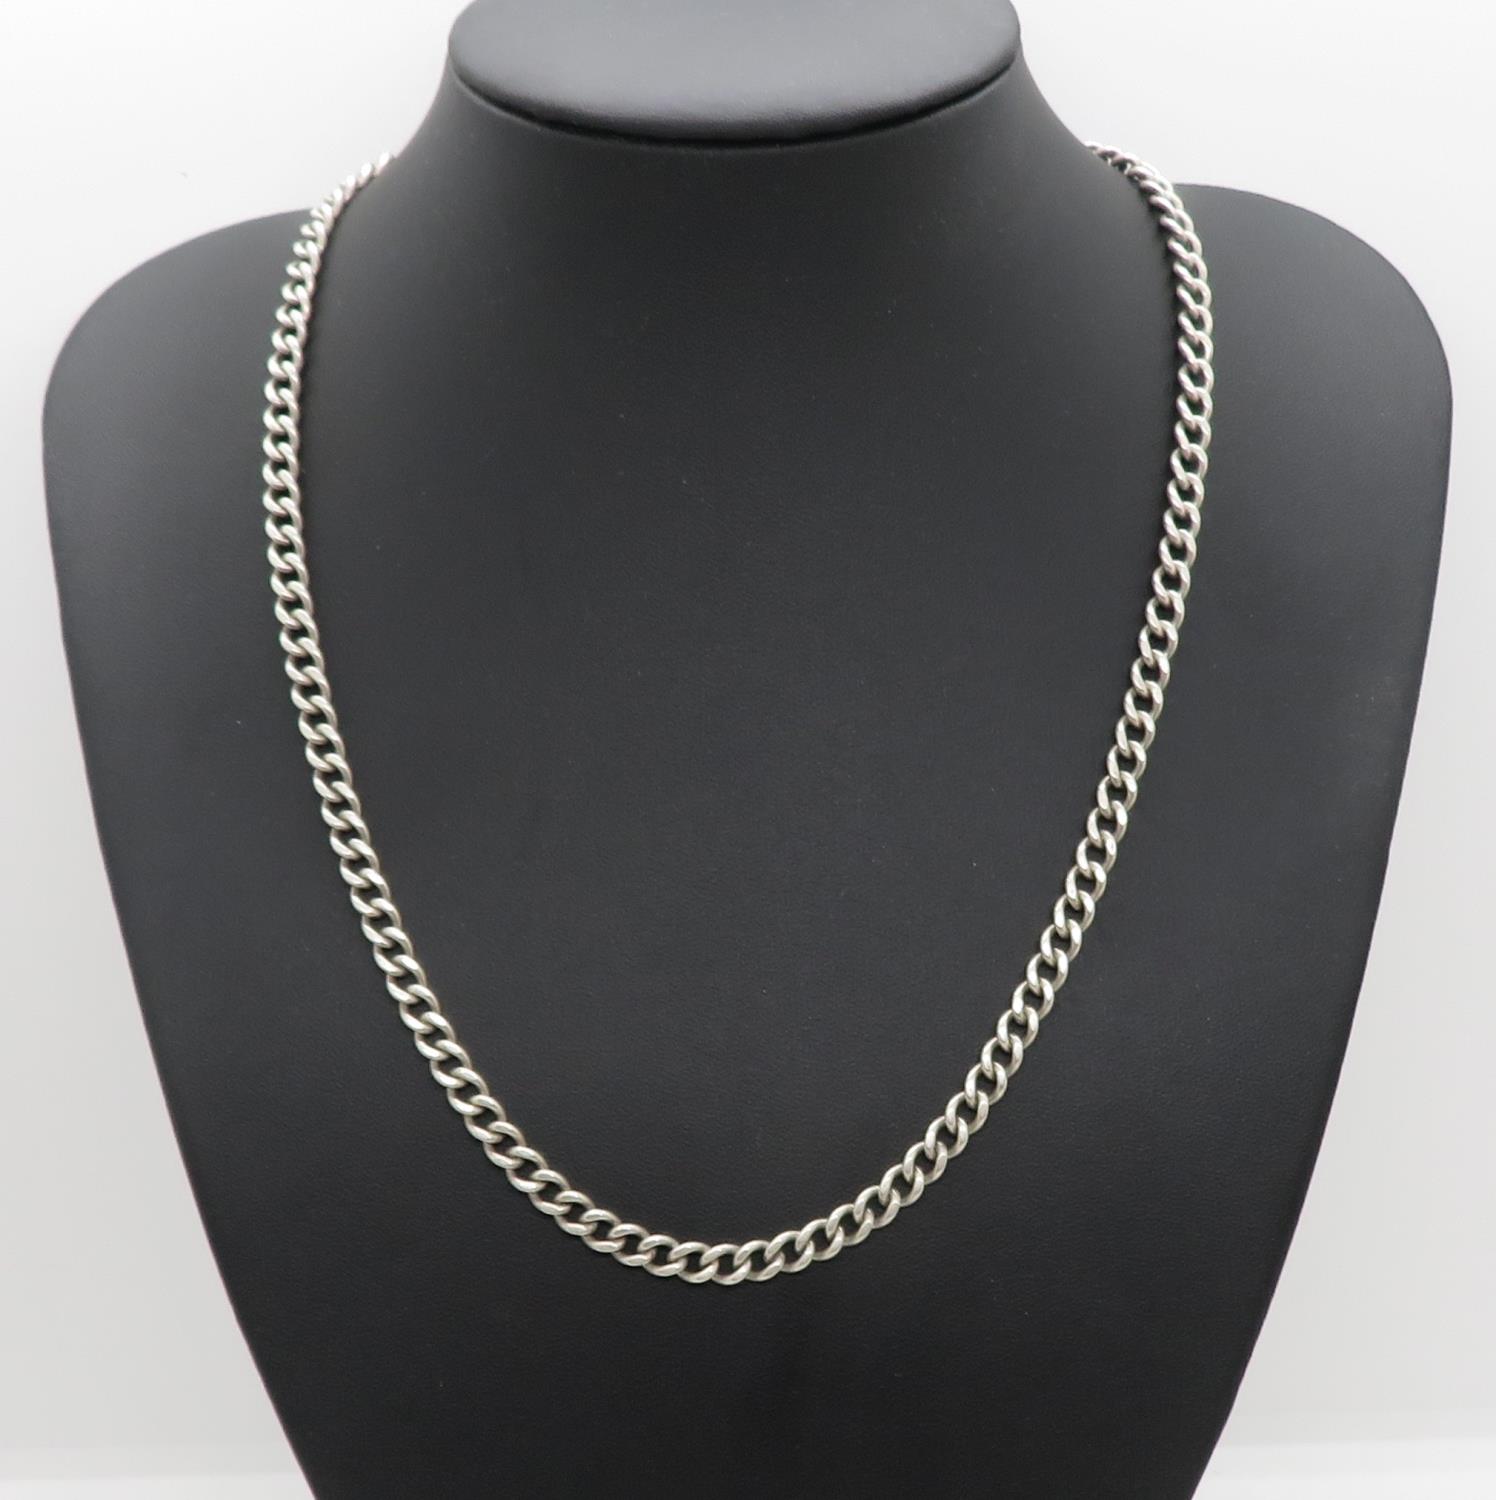 Silver necklace 20" 14g